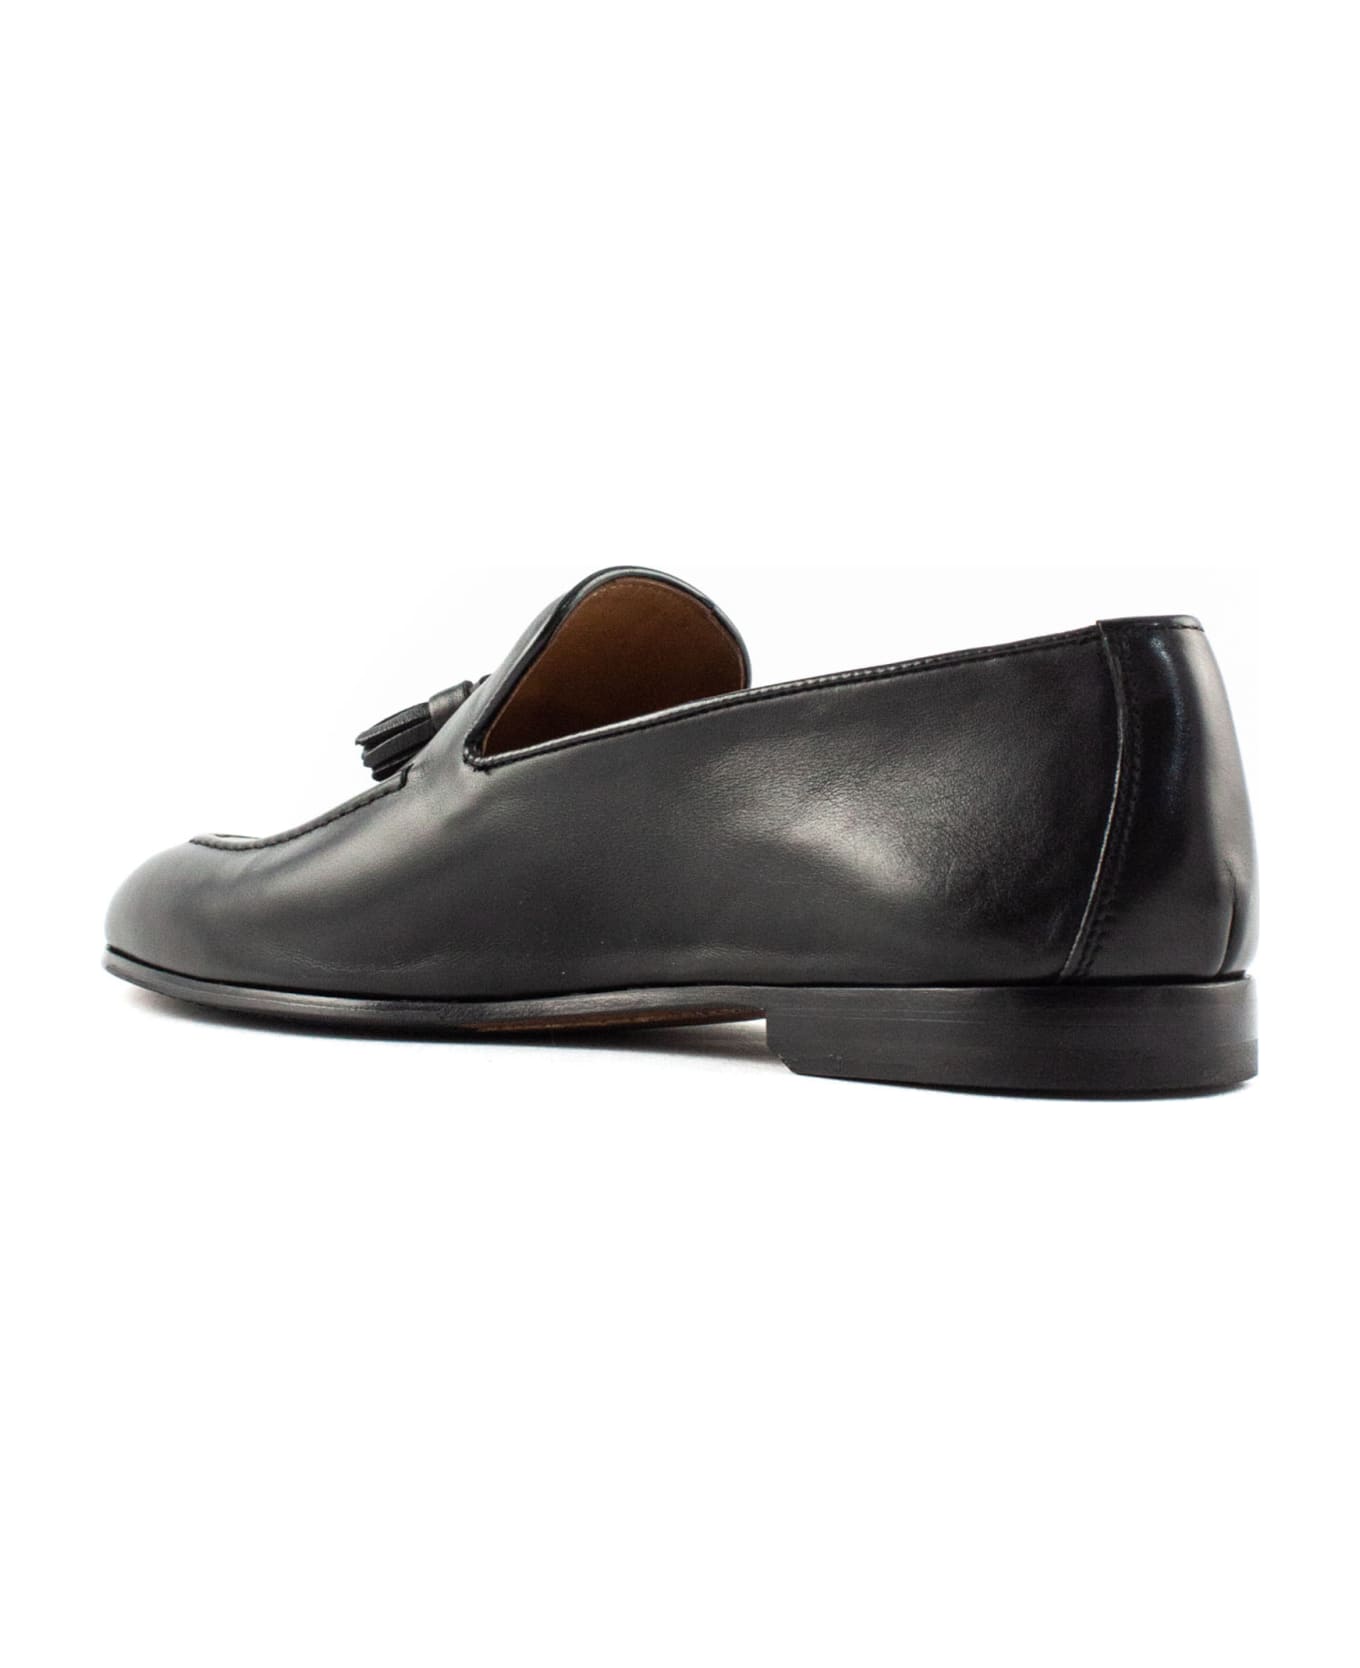 Doucal's Black Smooth Leather Loafer - Nero